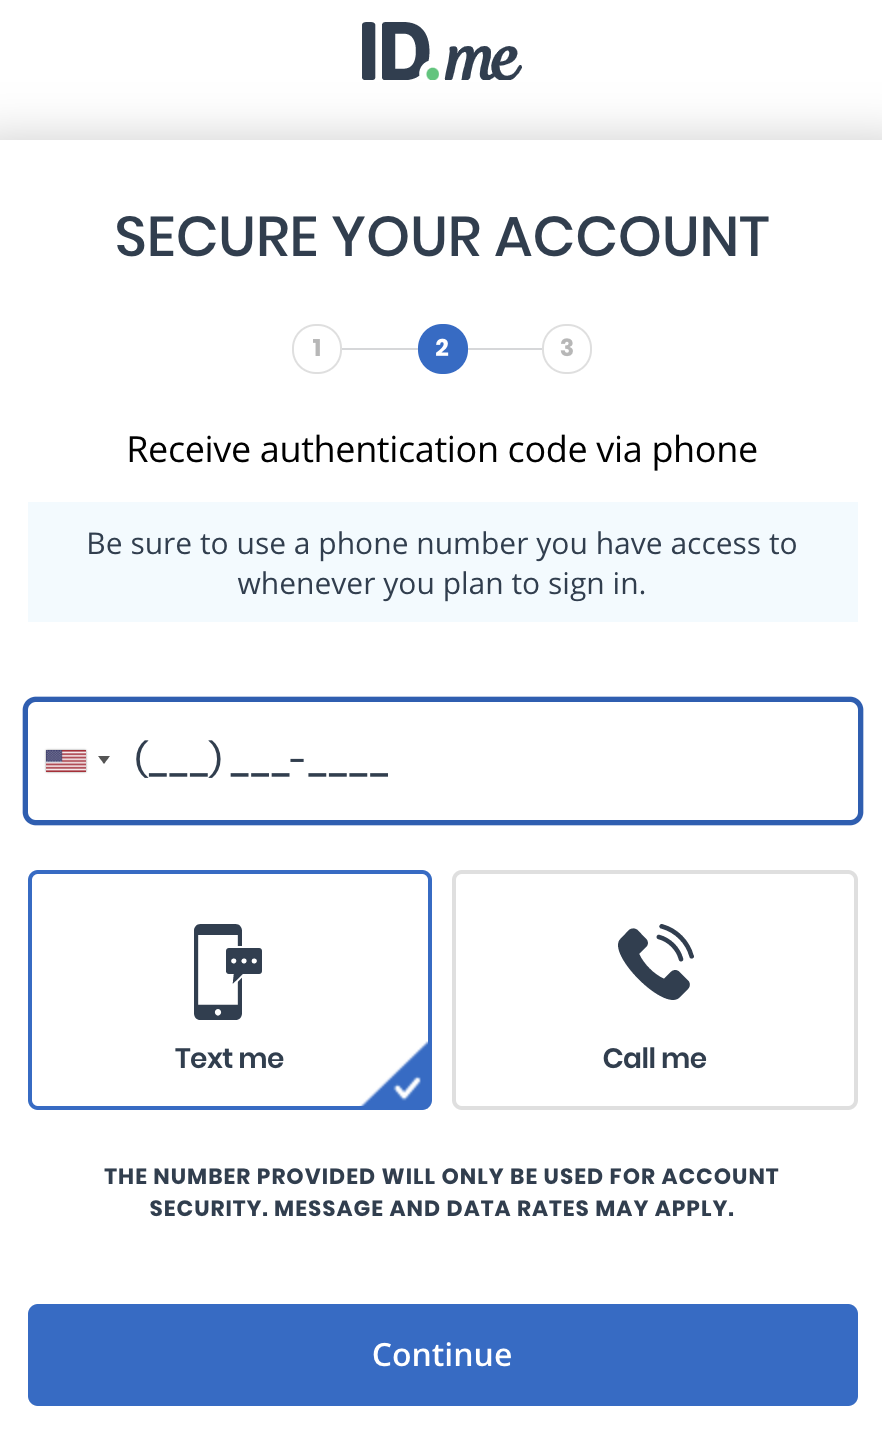 Enter your phone number and select how you would like to receive your verification code (via text or phone call).